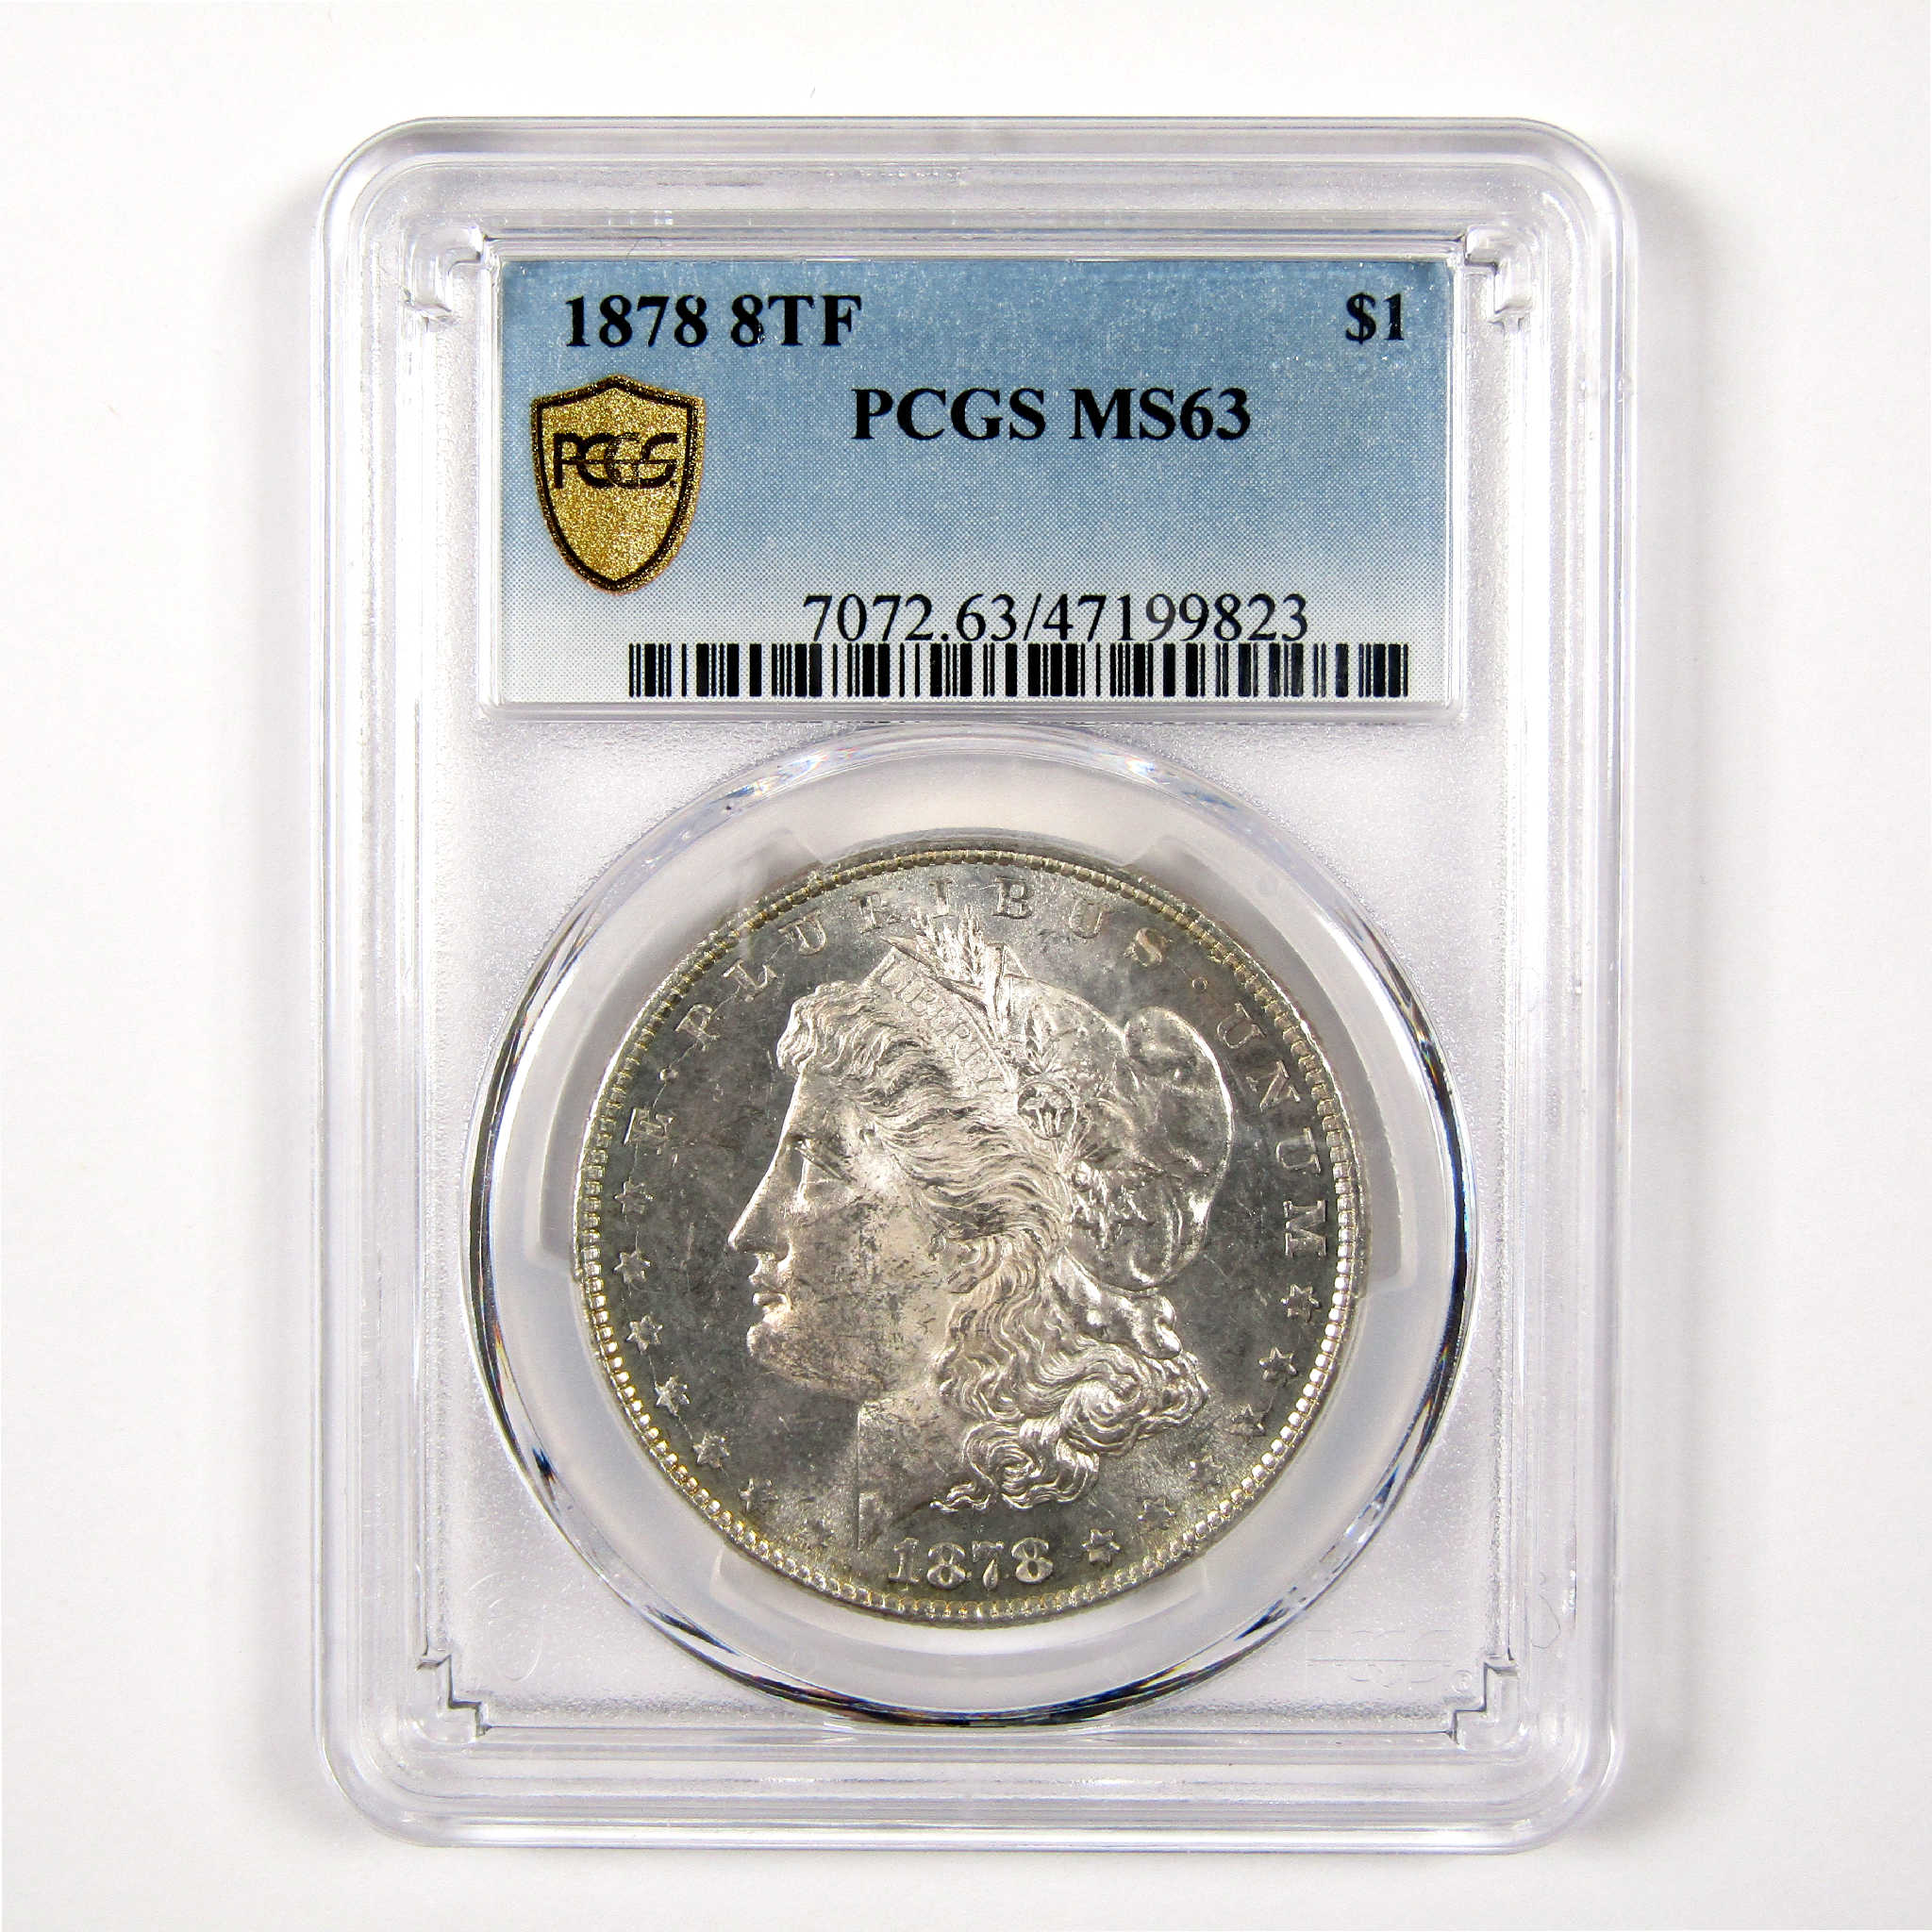 1878 8TF Morgan Dollar MS 63 PCGS Silver $1 Uncirculated SKU:I11320 - Morgan coin - Morgan silver dollar - Morgan silver dollar for sale - Profile Coins &amp; Collectibles